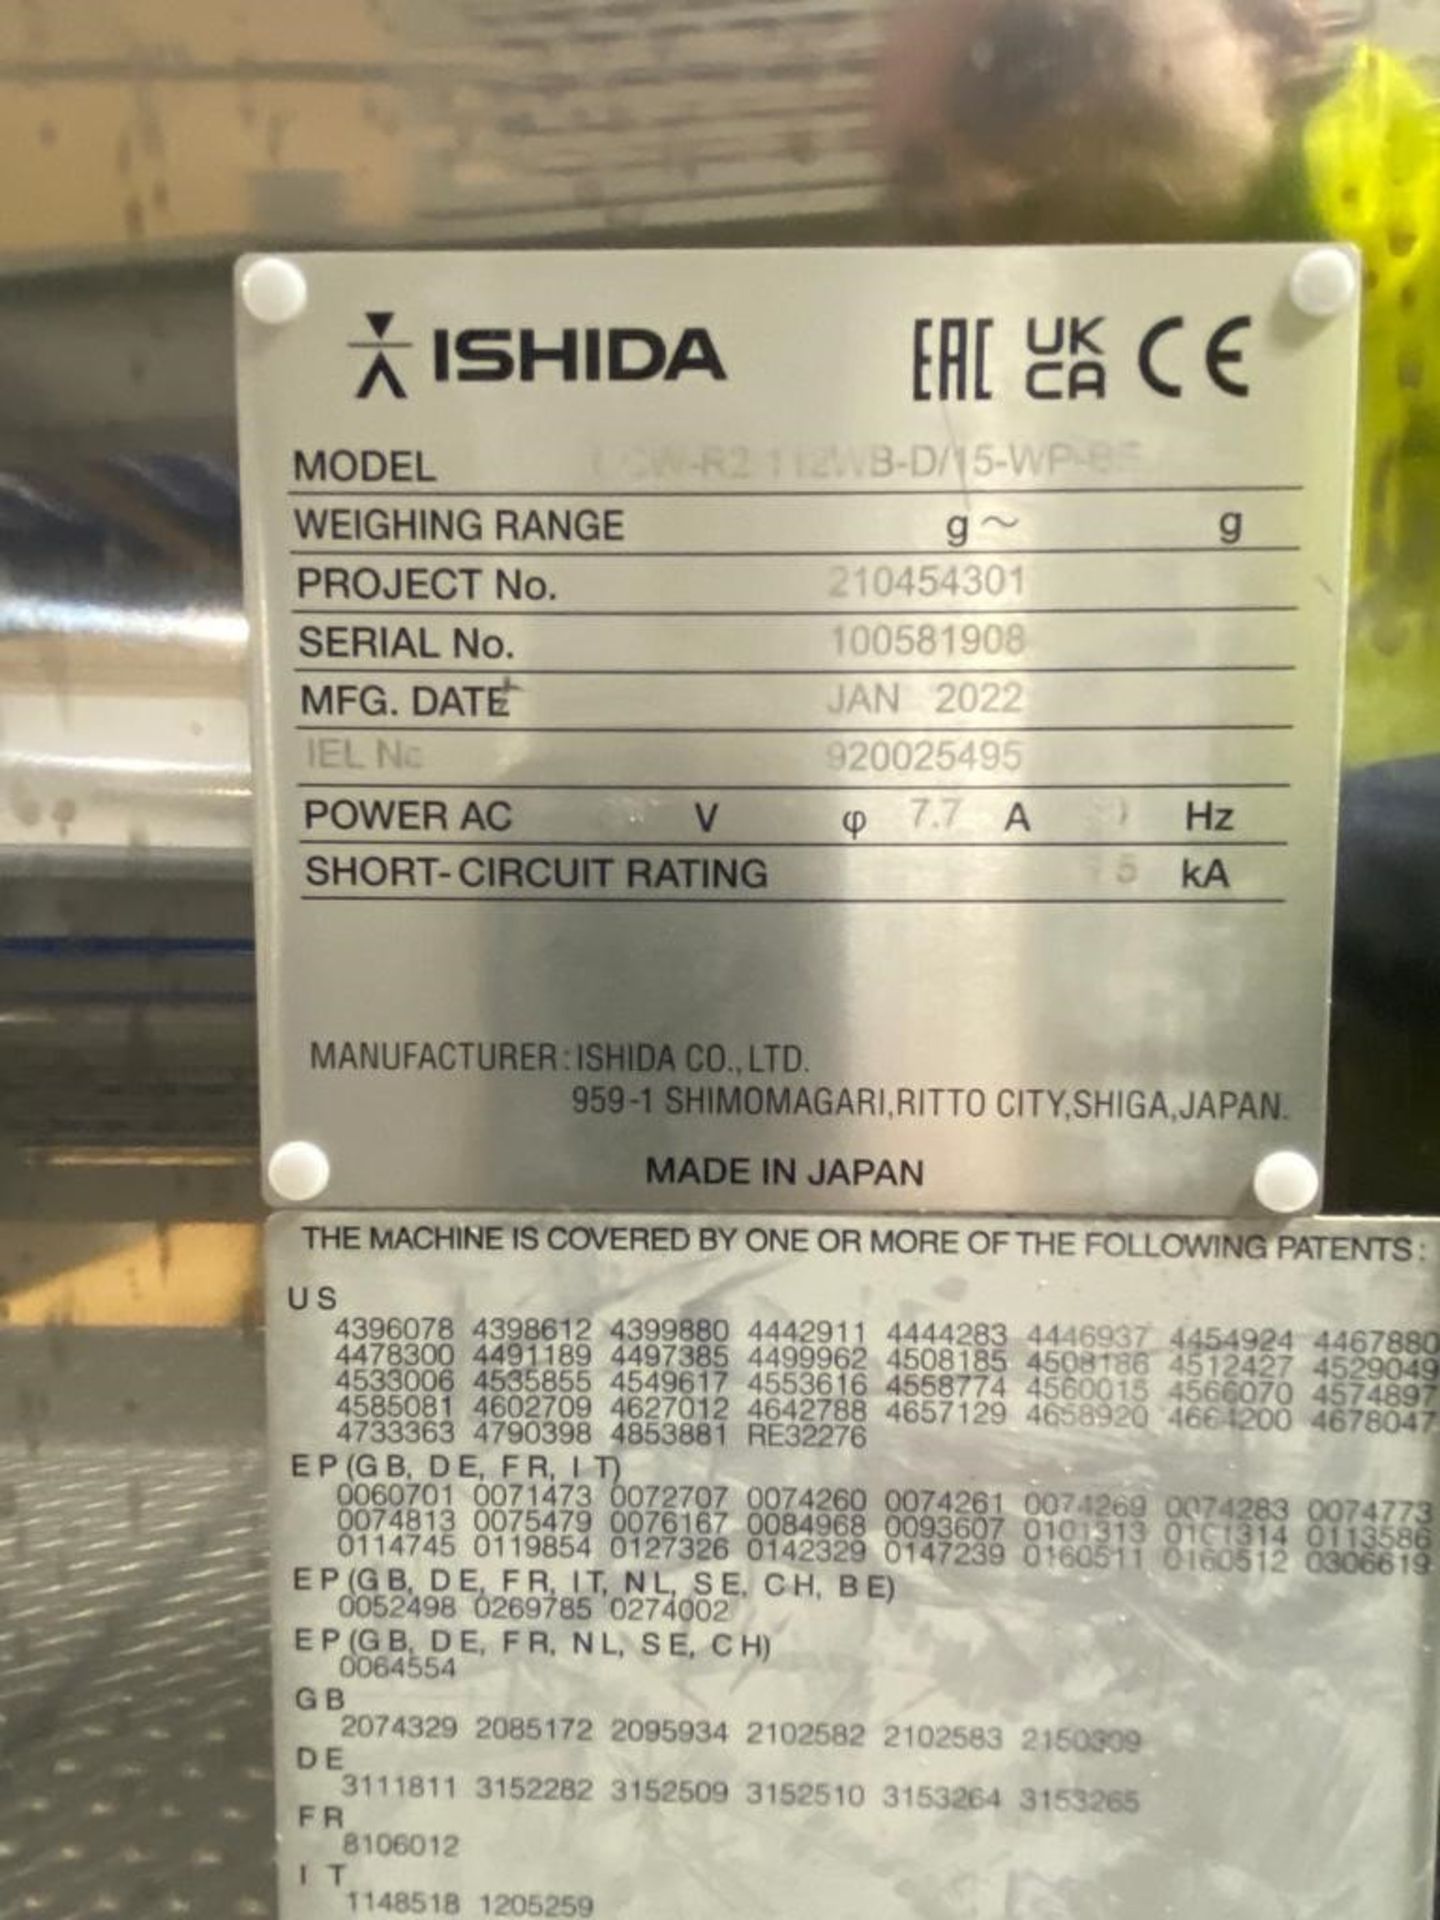 Ishida High speed 12 Head fresh fruit weighing system including access platform, product tray - Image 10 of 10